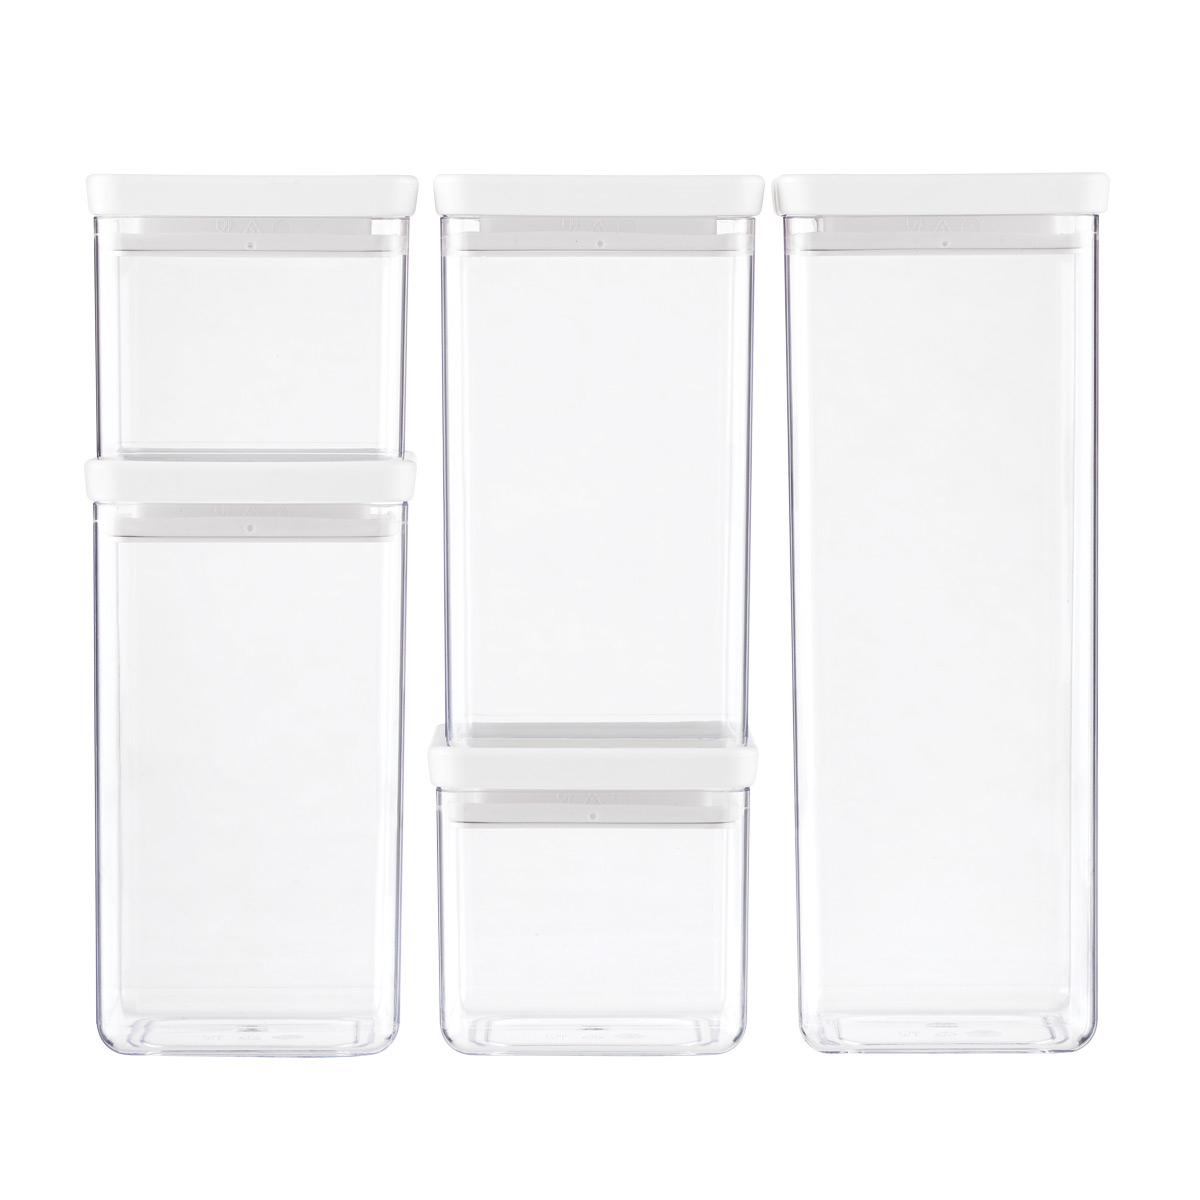 https://www.containerstore.com/catalogimages/383253/10079767-5-Piece-Cannister-Set-white.jpg